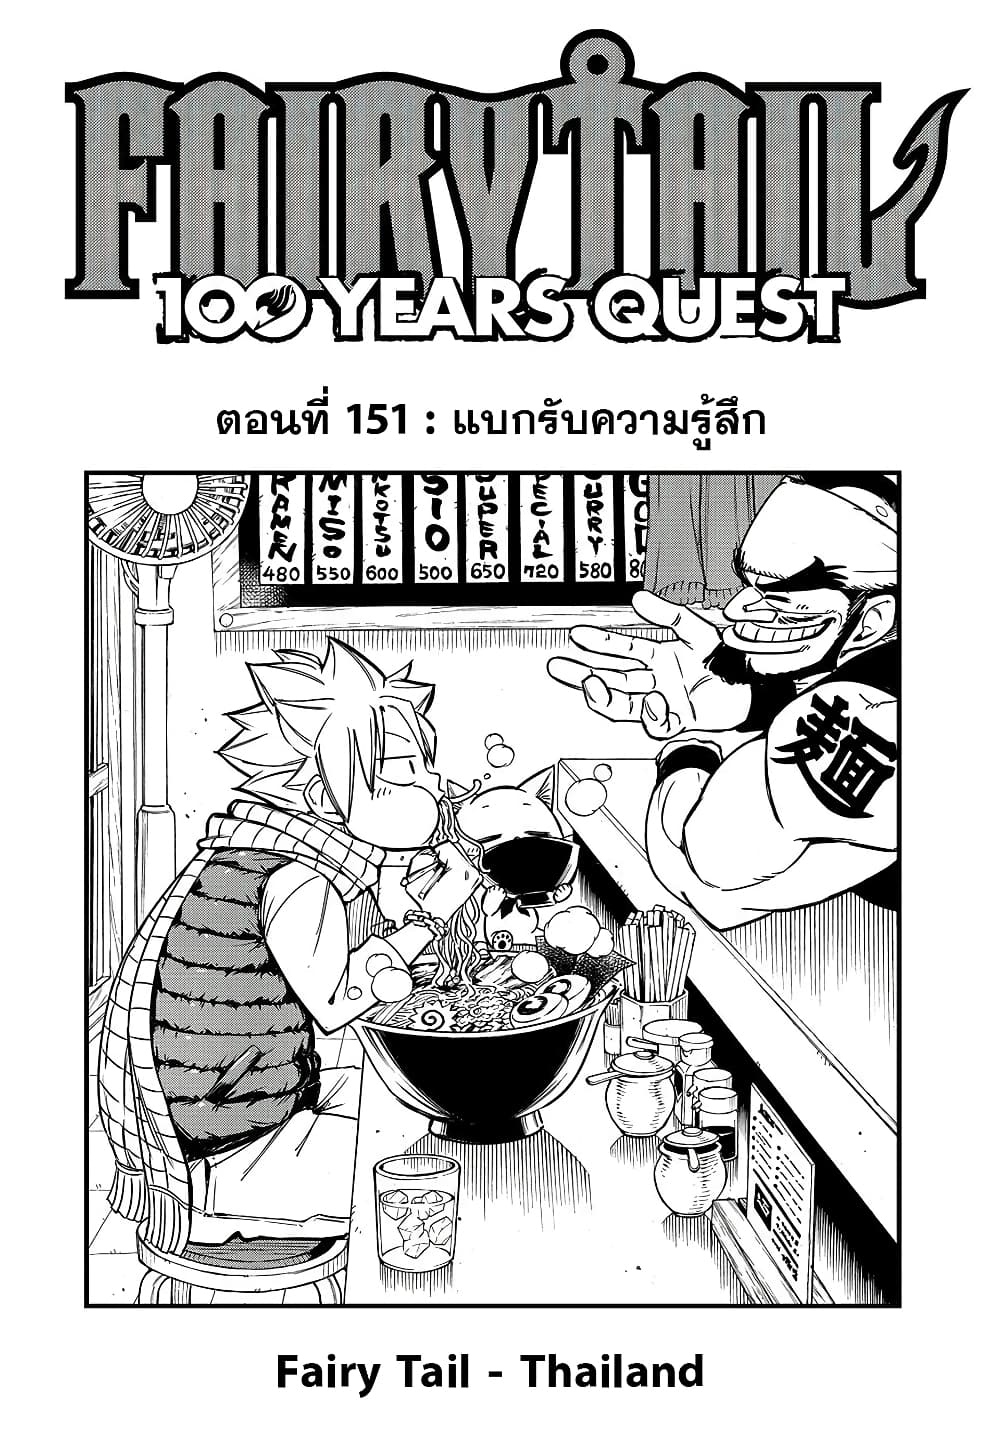 Fairy Tail 100 Years Quest 151 TH